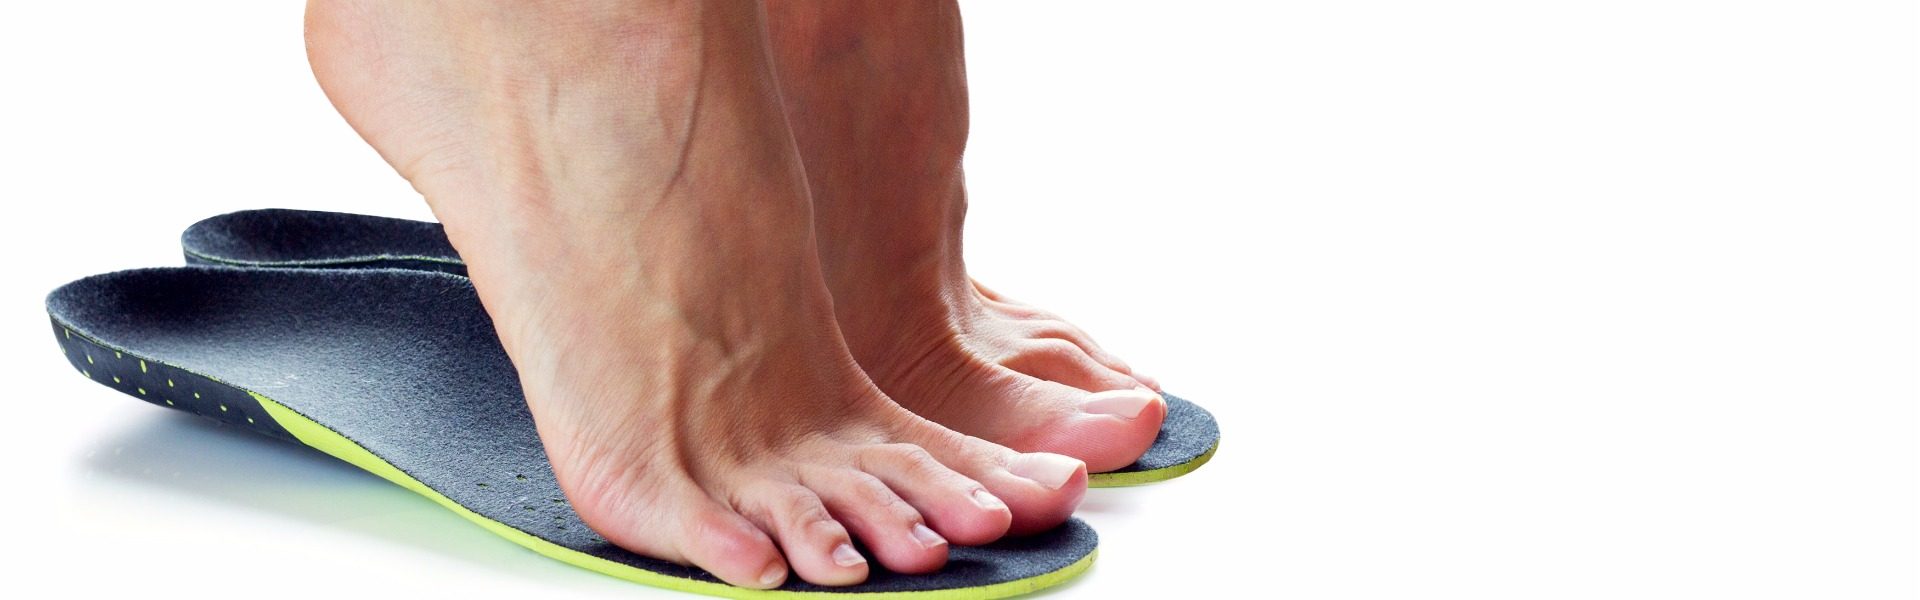 Is it possible that insoles can hurt feet?Is it possible that insoles can hurt feet?